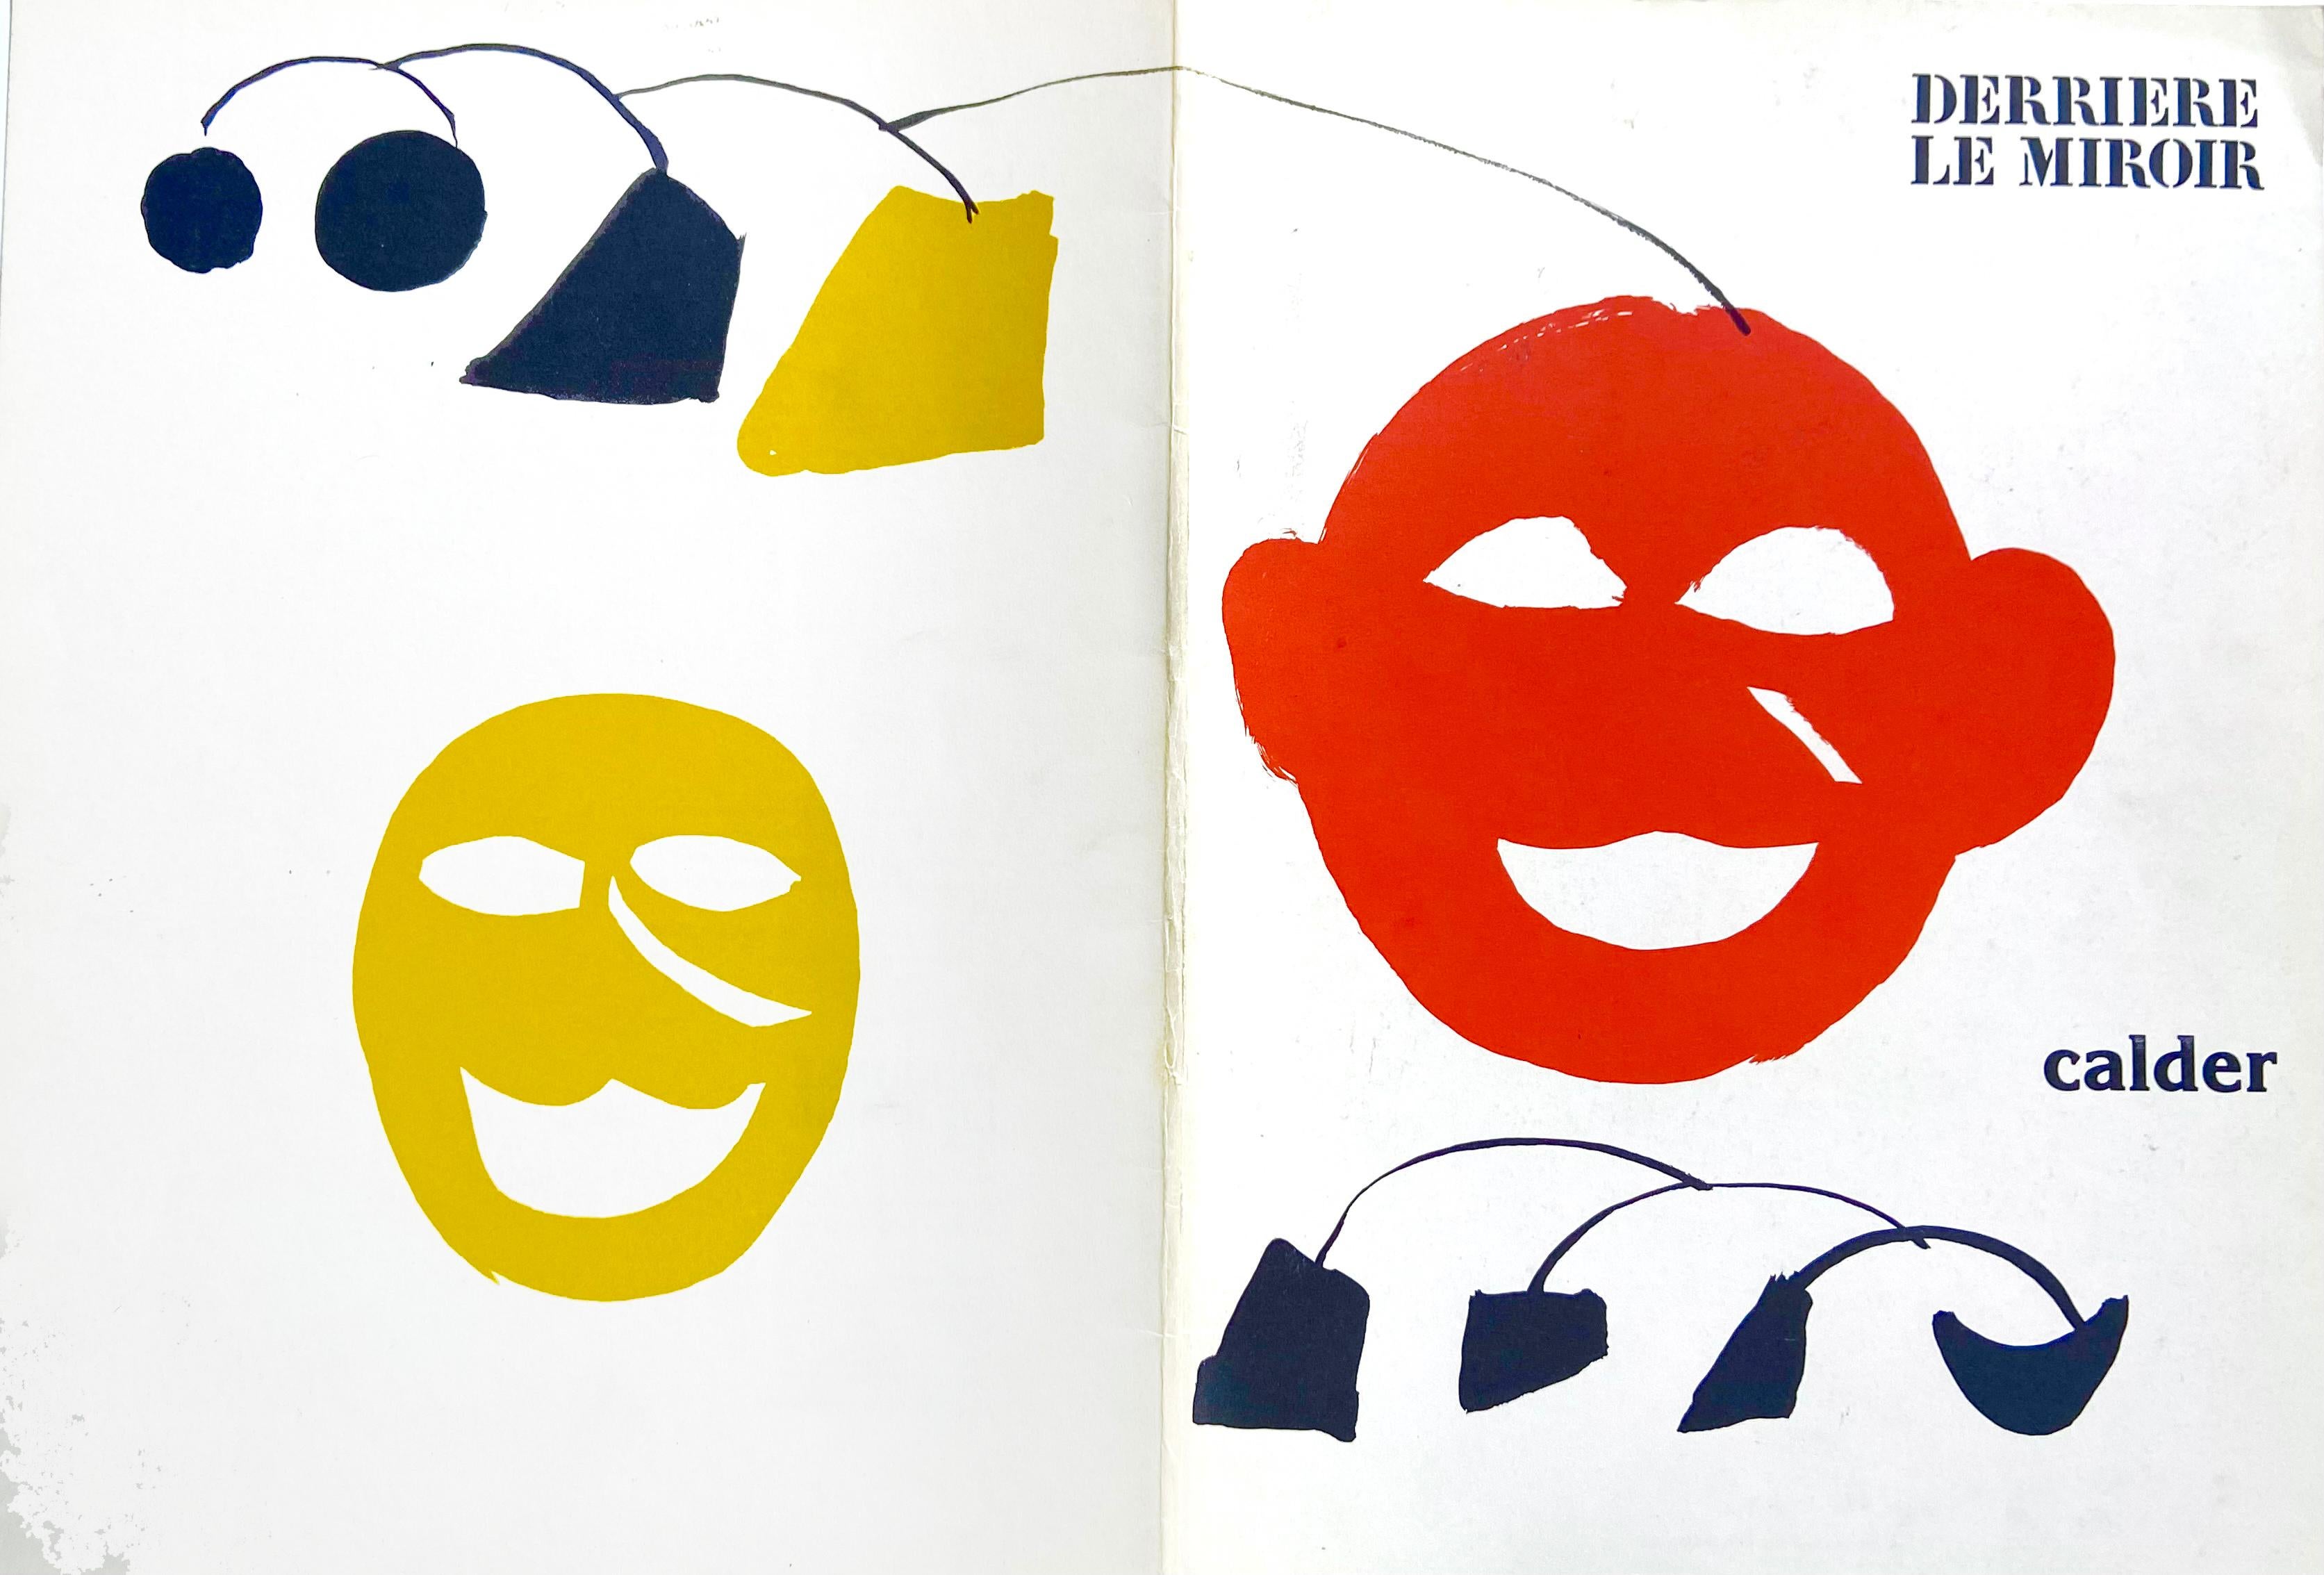 Alexander Calder Lithographic cover c. 1968 from Derrière le miroir:

Lithograph in colors; 11 x 15 inches (opening to 15x22 inches).
Scattered surface and age related wear; in otherwise good overall vintage condition.
Unsigned from an edition of